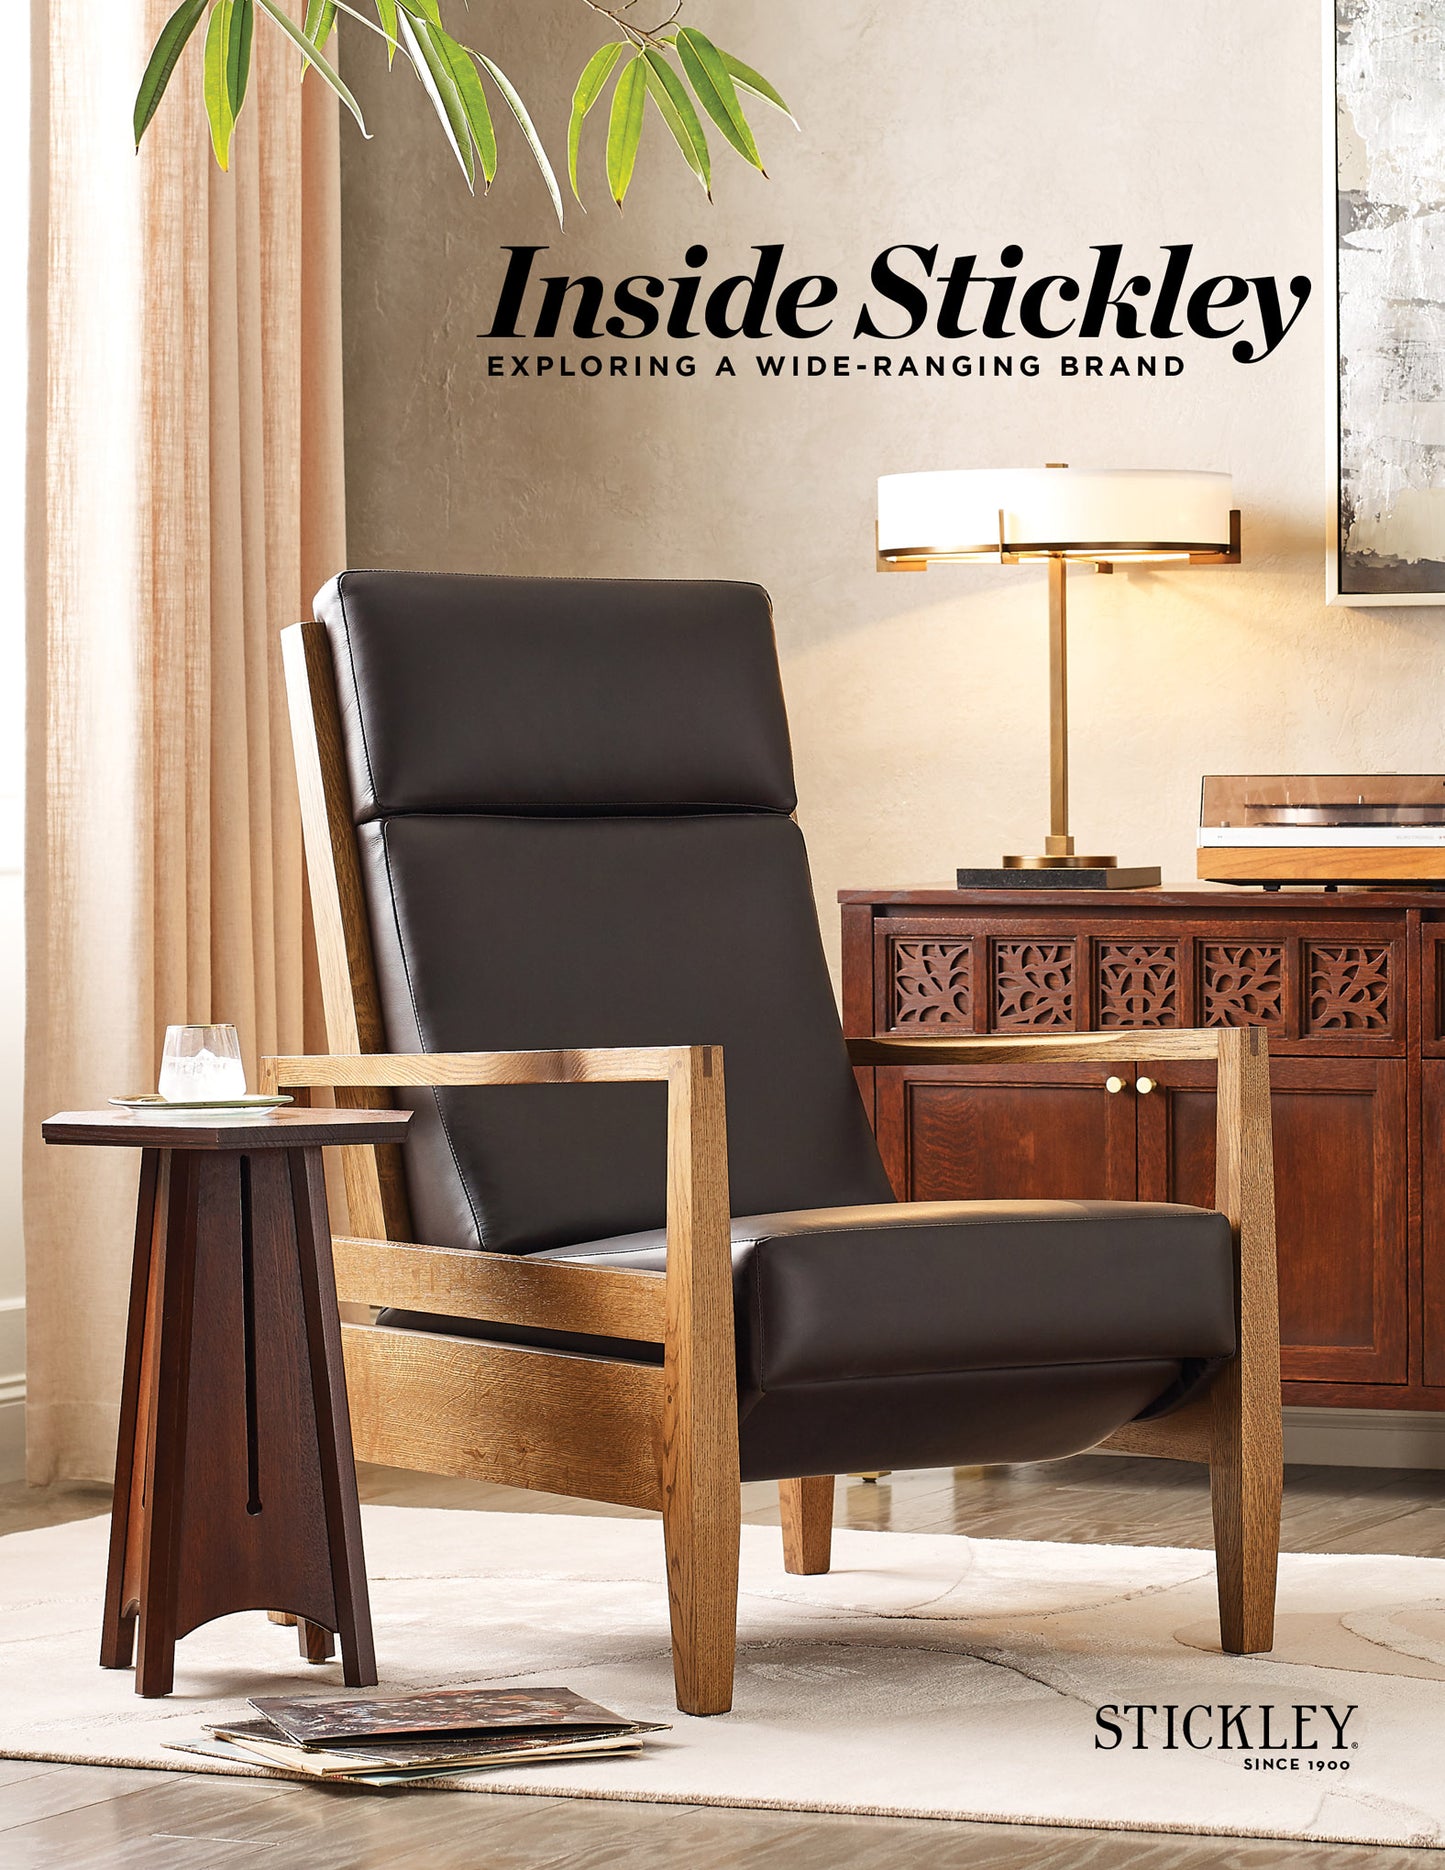 Inside Stickley: Exploring a Wide-Ranging Brand